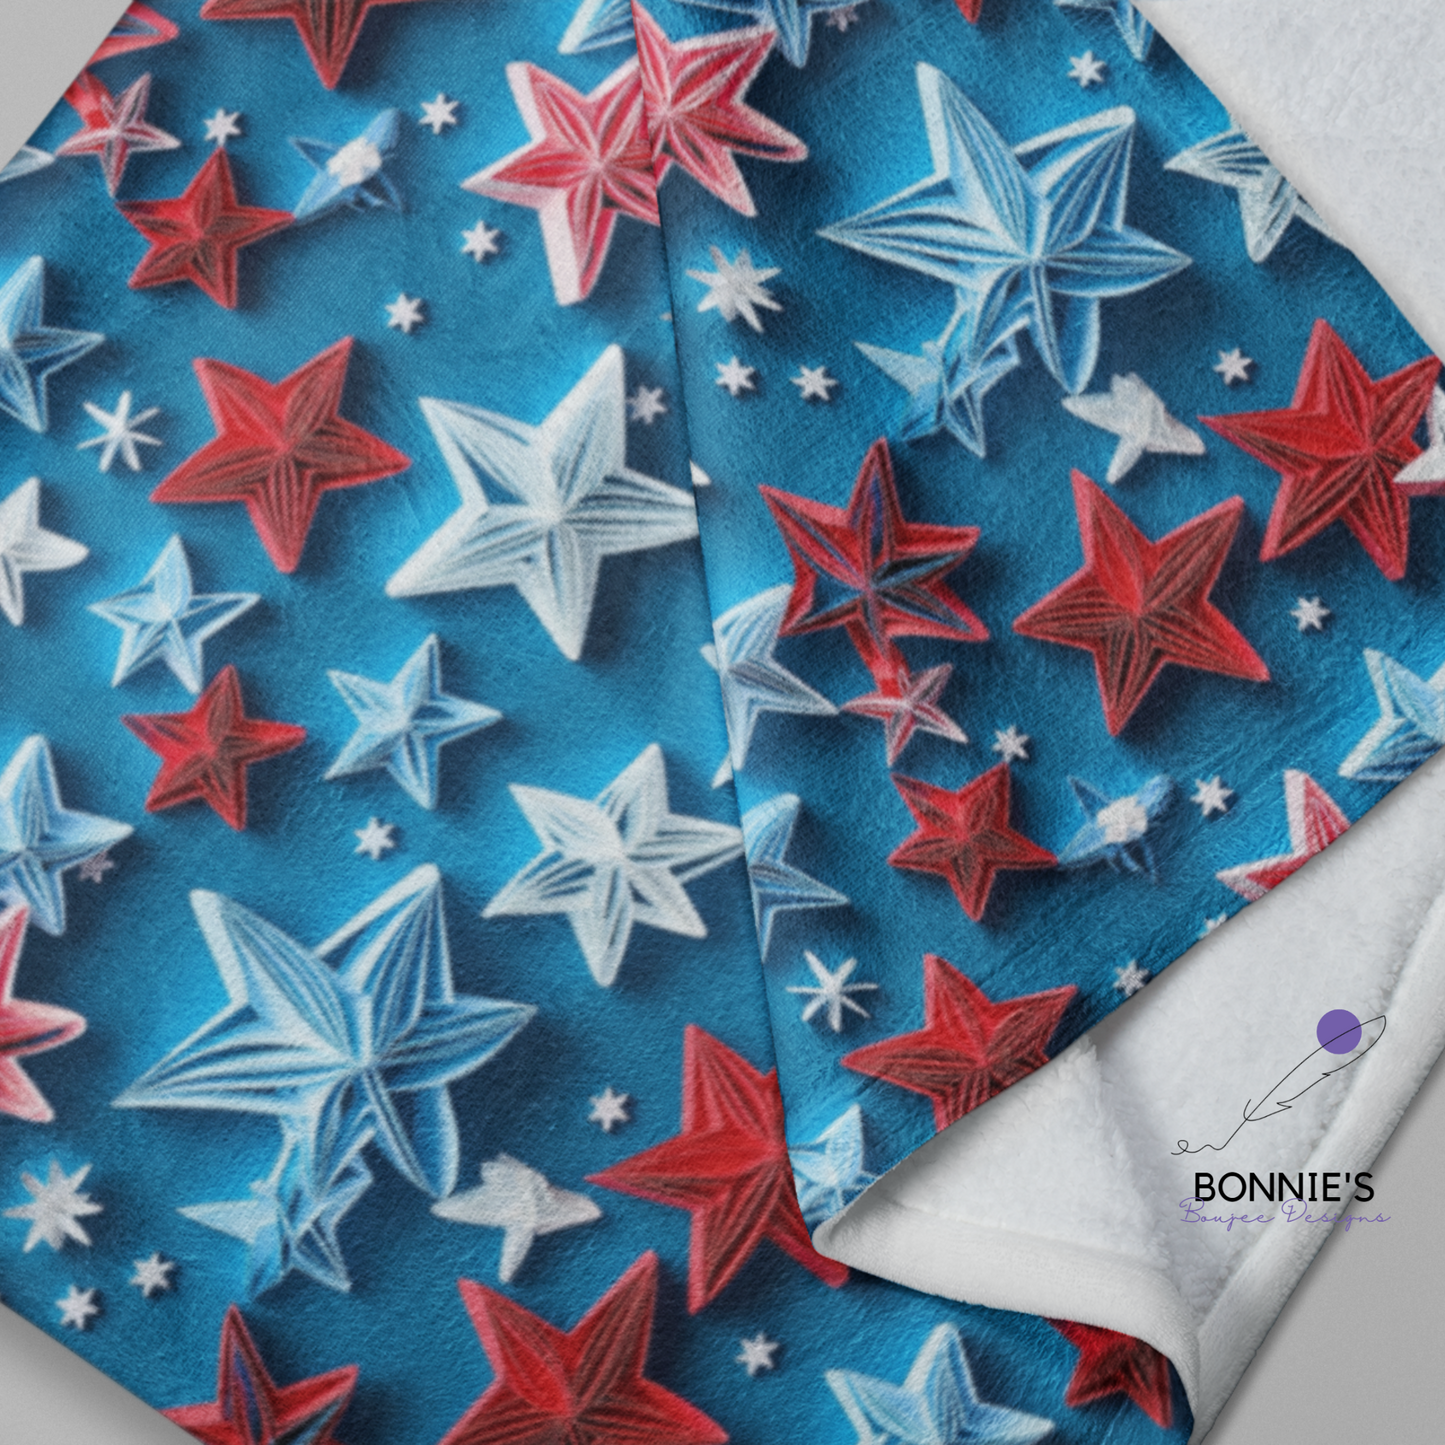 Paper Quilling of Red, White and Blue Stars Seamless File